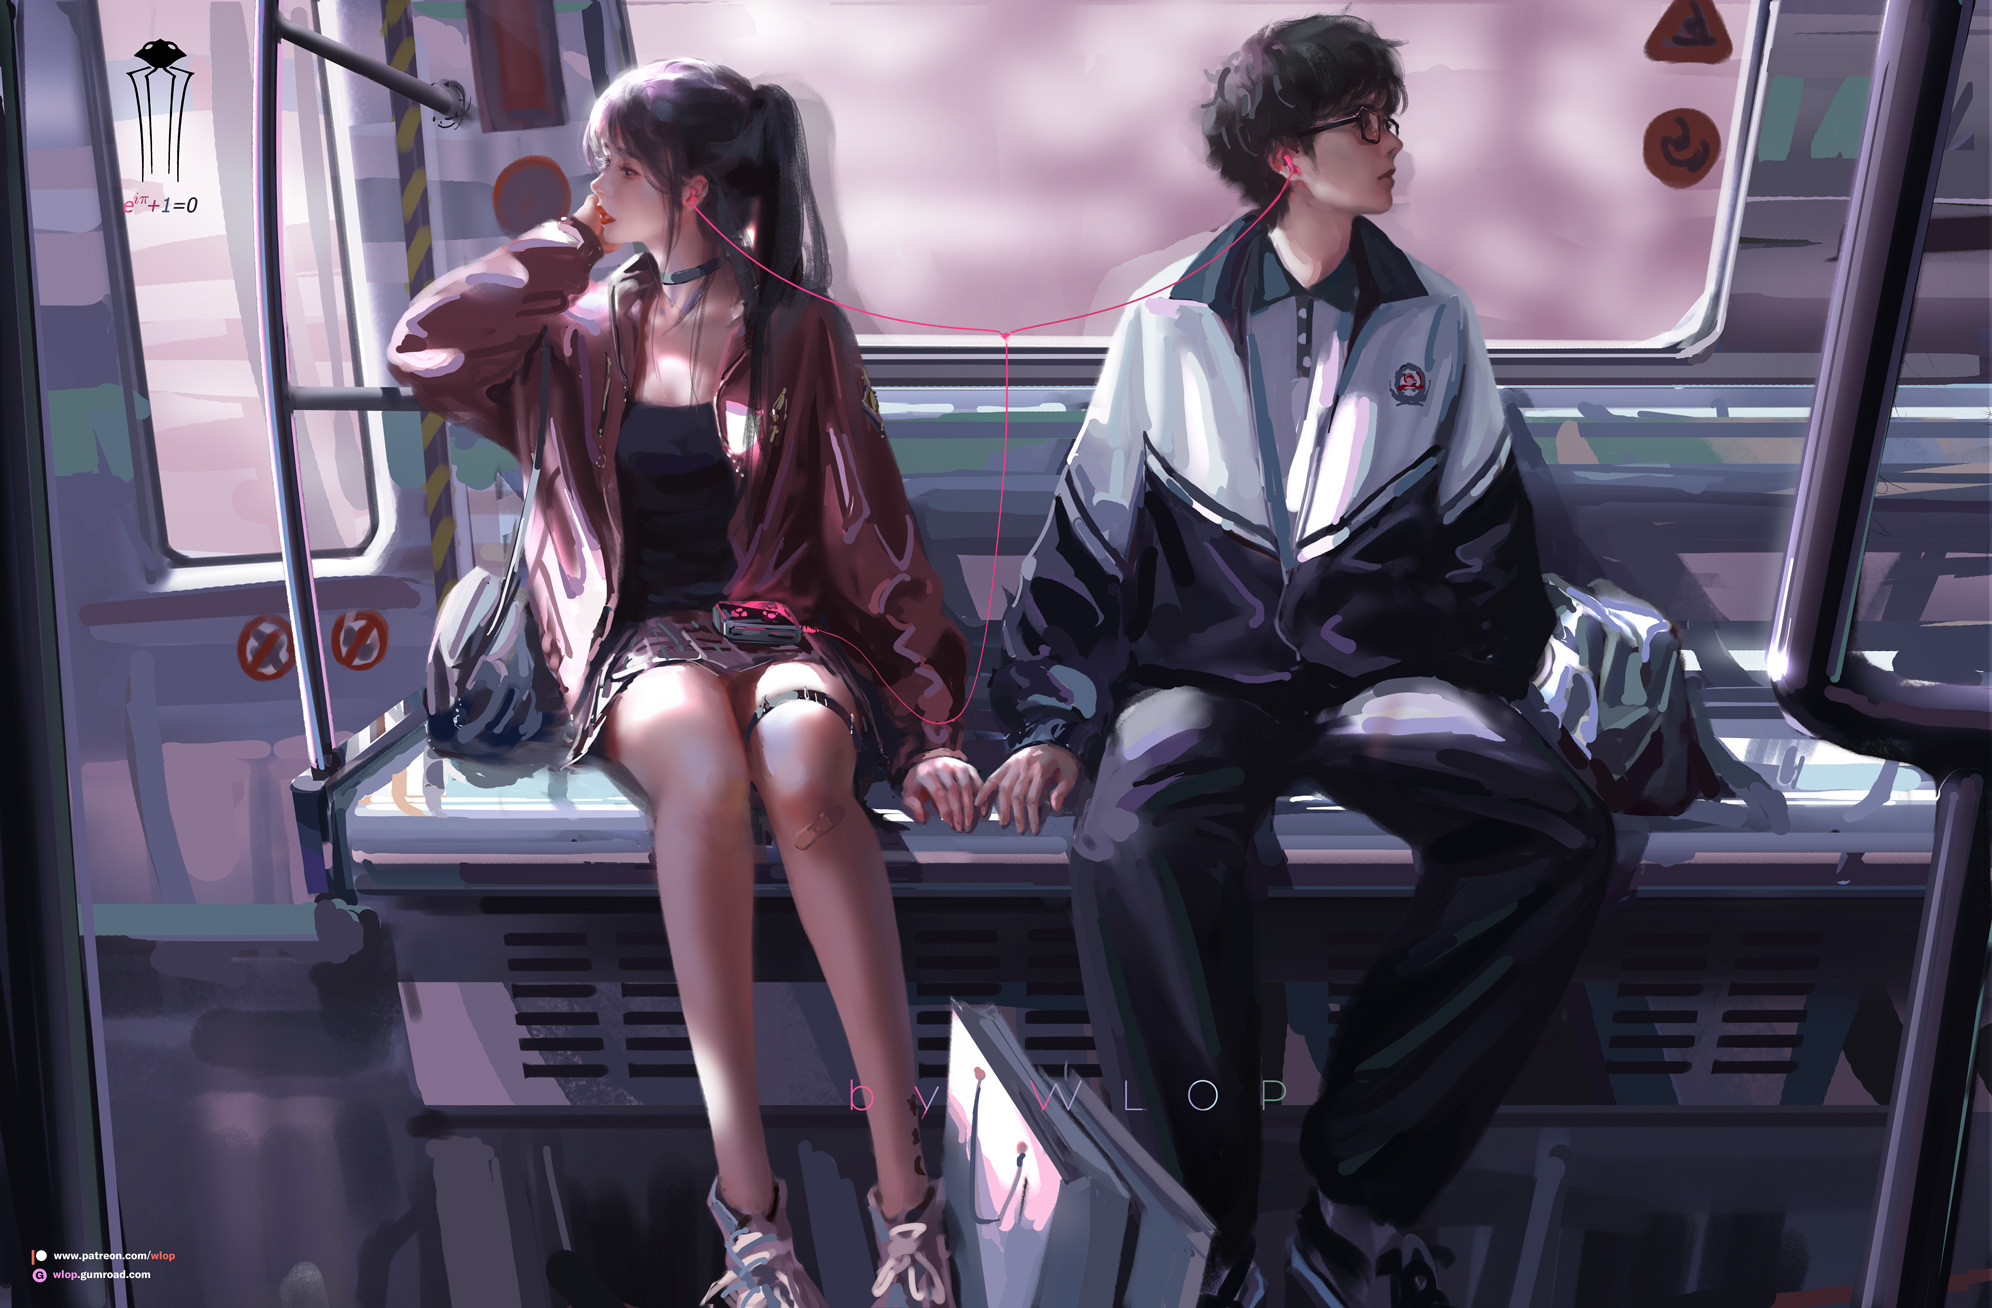 WLOP Digital Art Artwork Illustration Couple Subway Women Looking At The Side Ear Buds Glasses 1992x1308